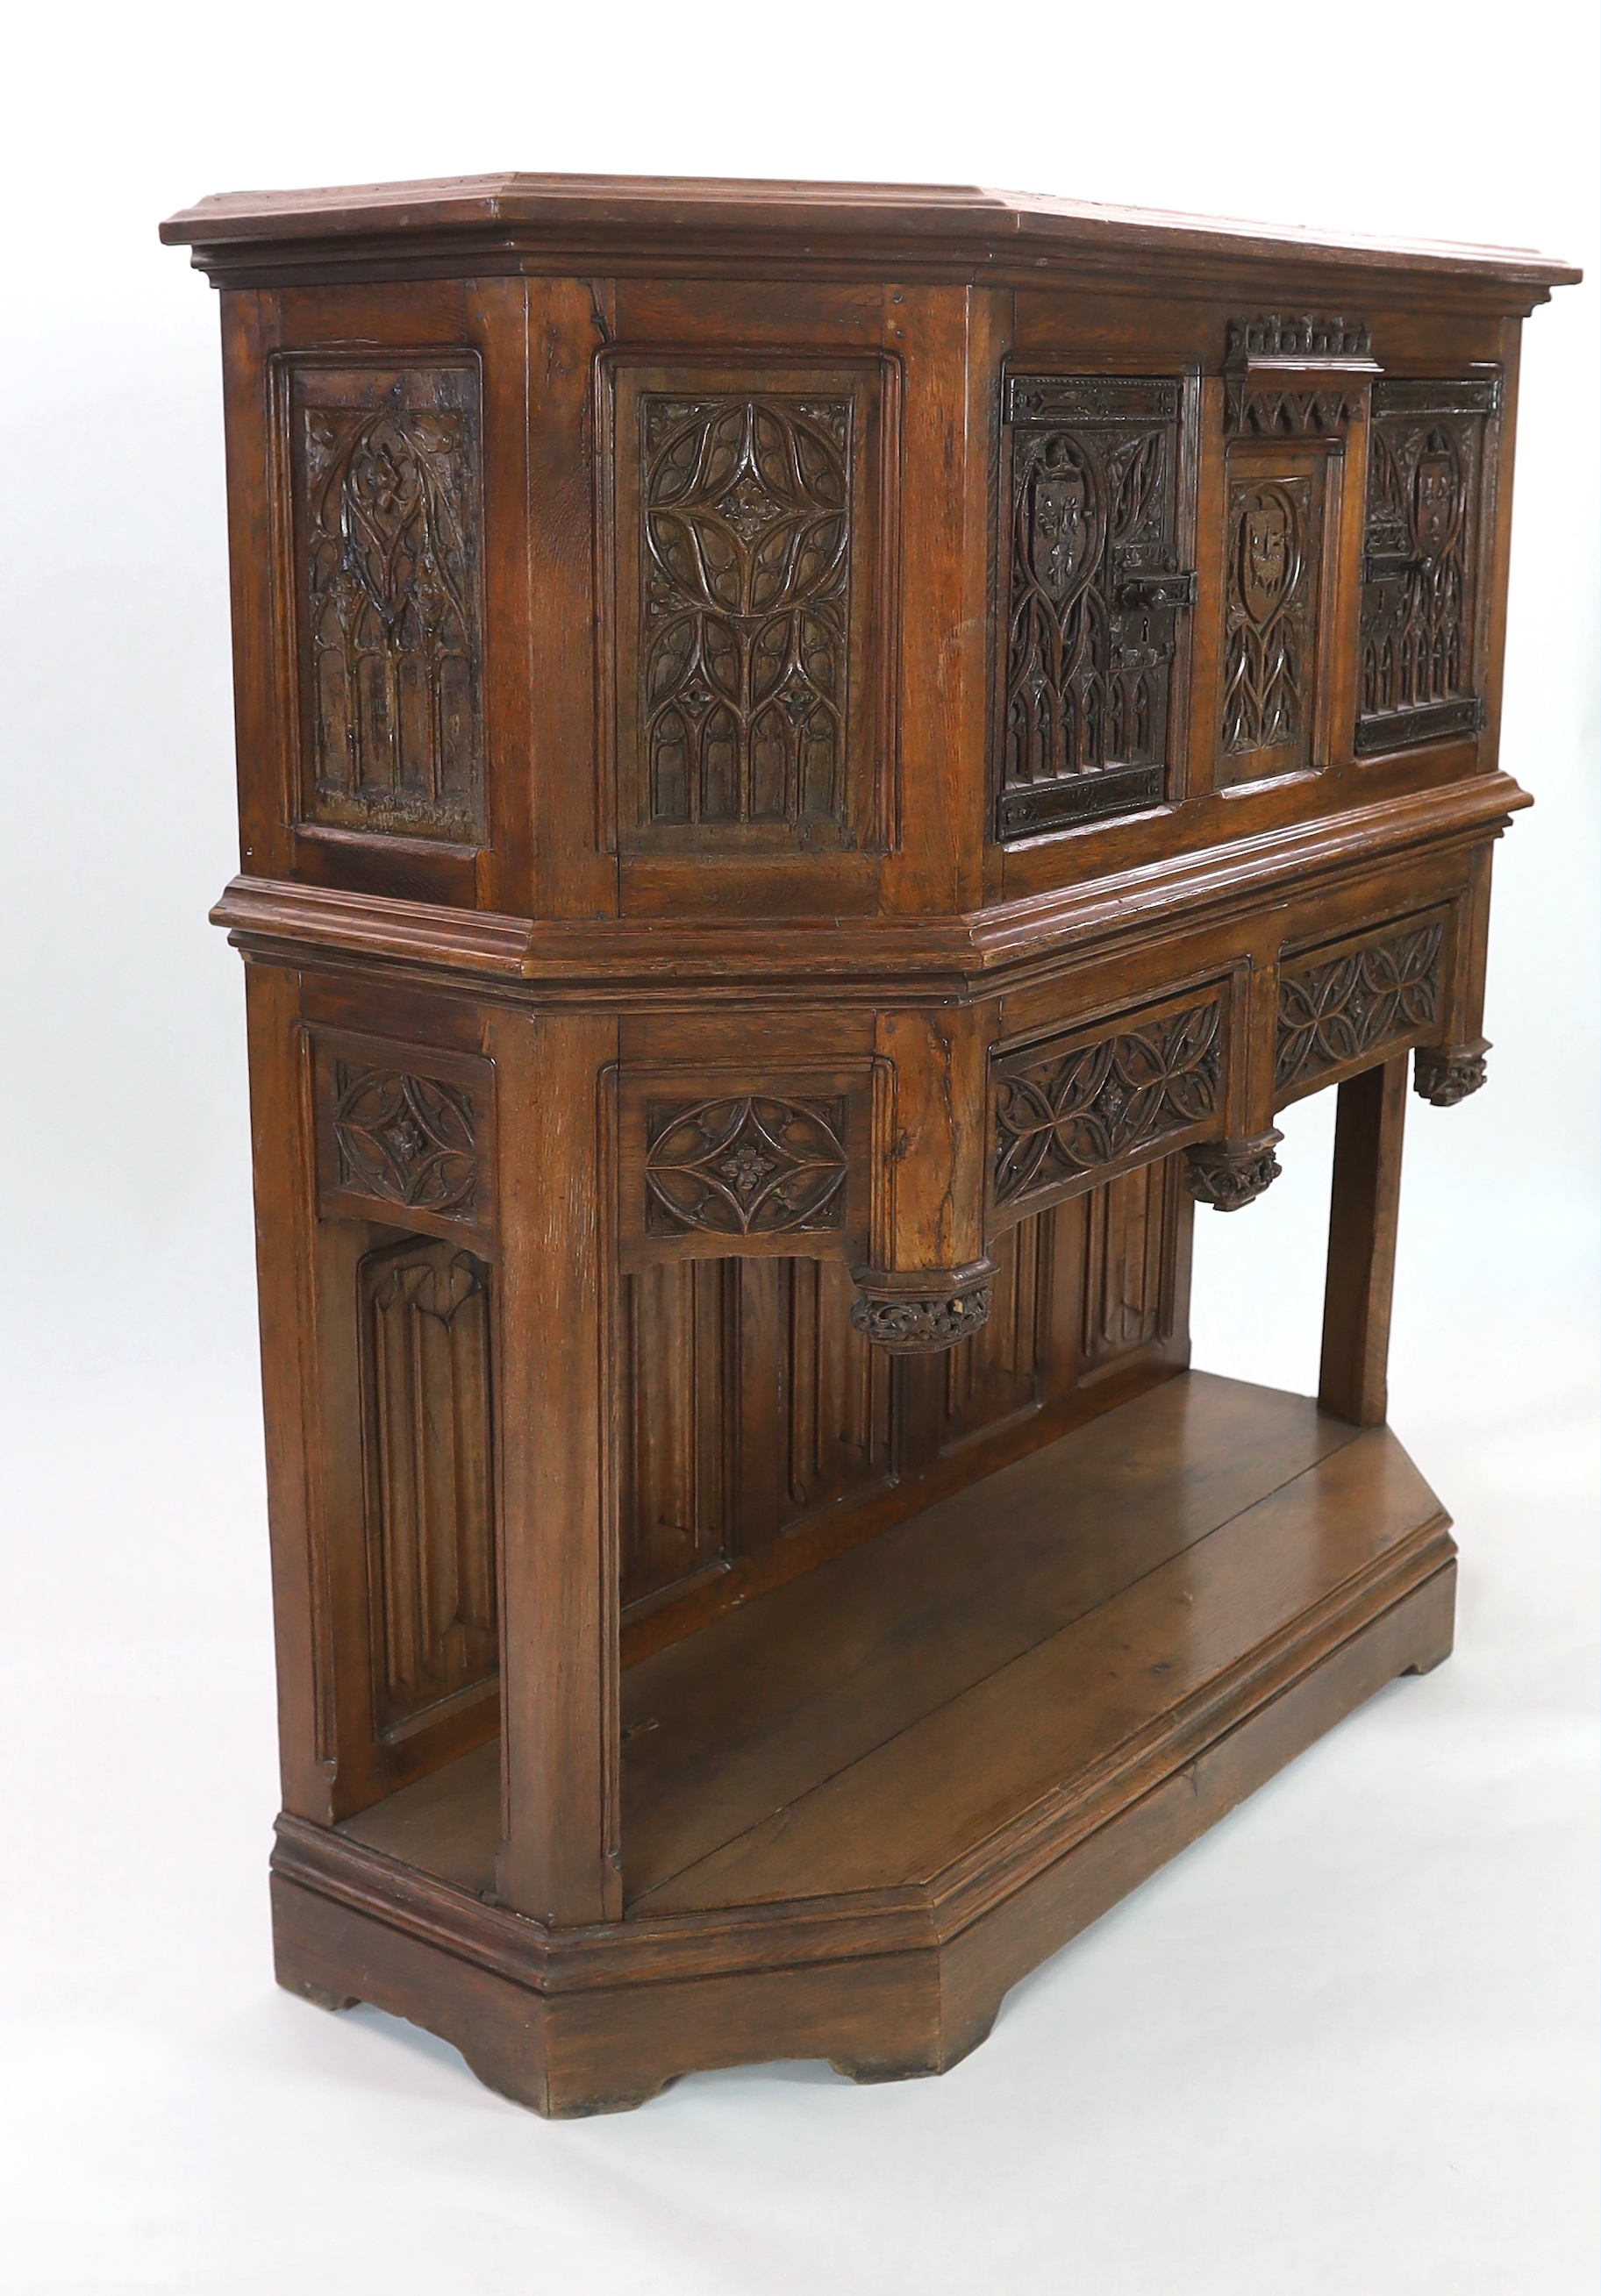 An antique oak dresser, based on a 15th century French gothic model and very similar to an example in the Wallace Collection